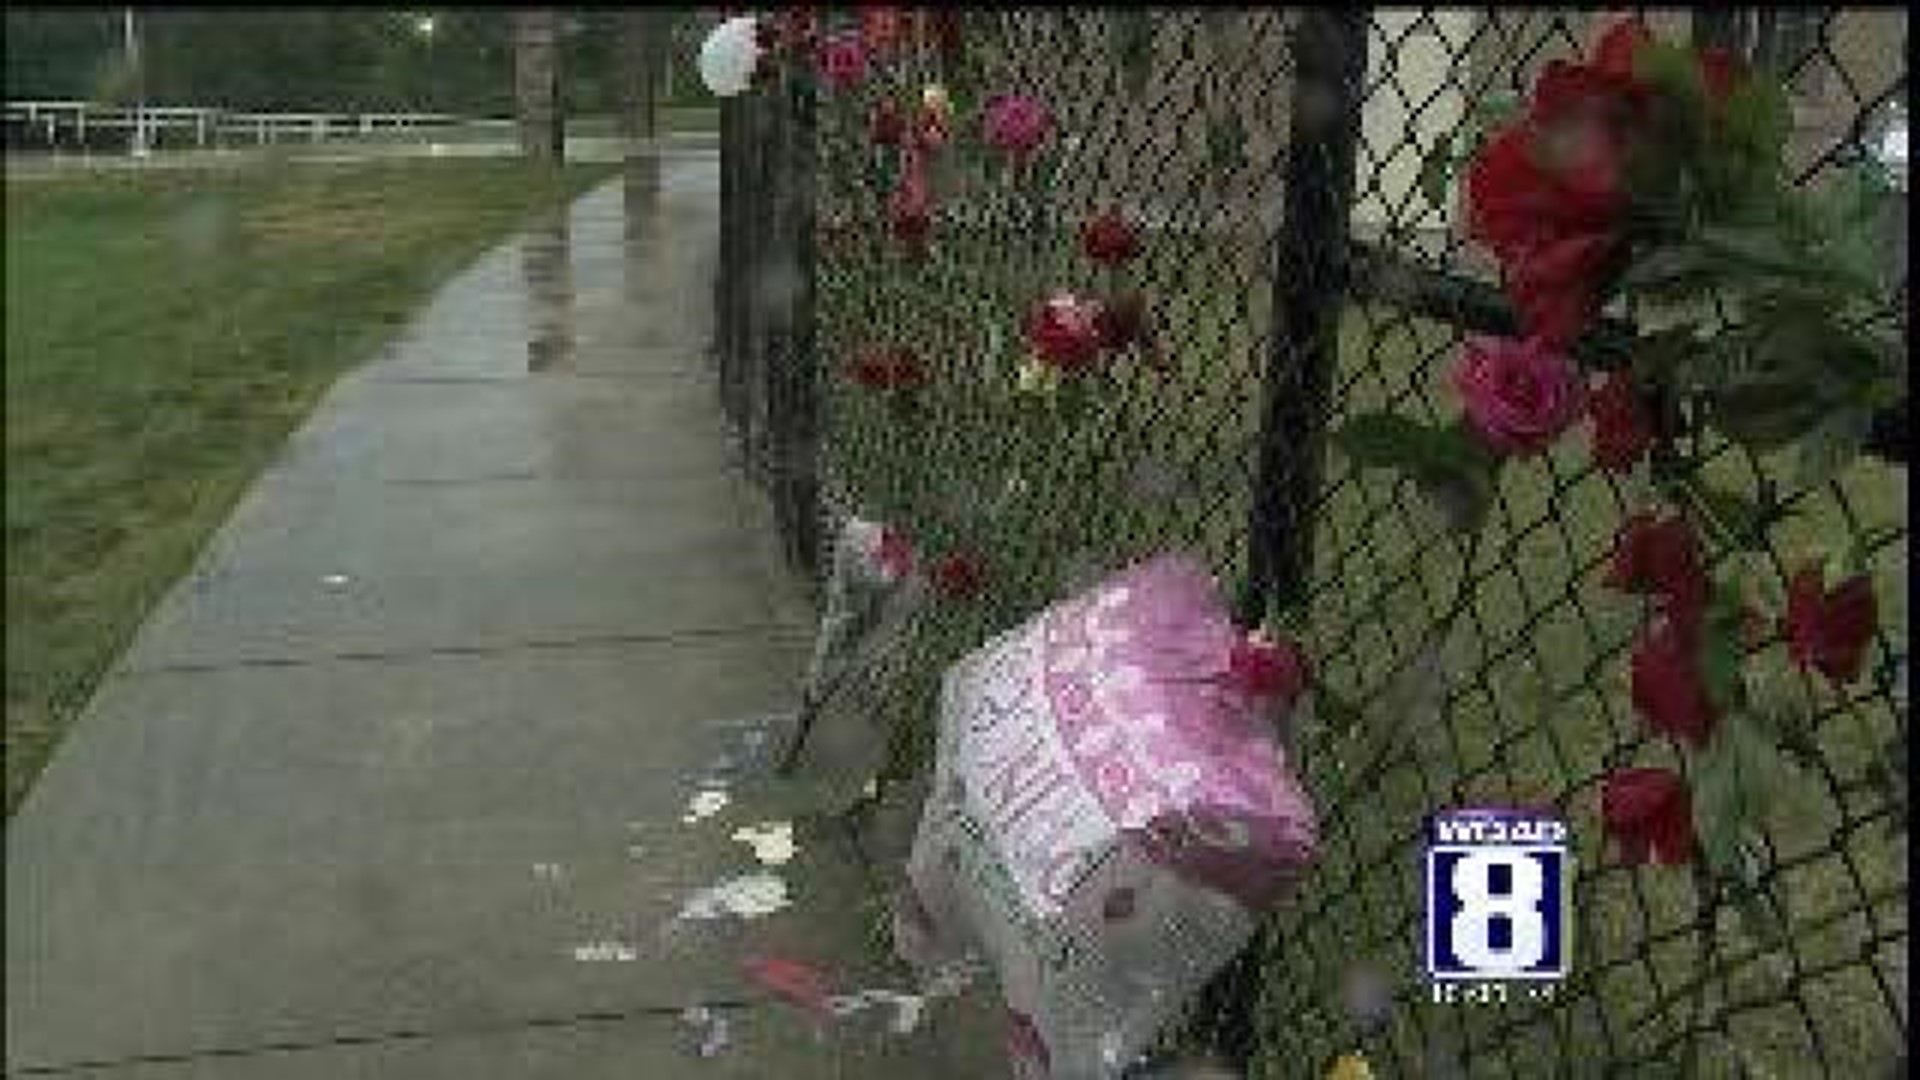 Family and friends mourn the loss of child who drowned